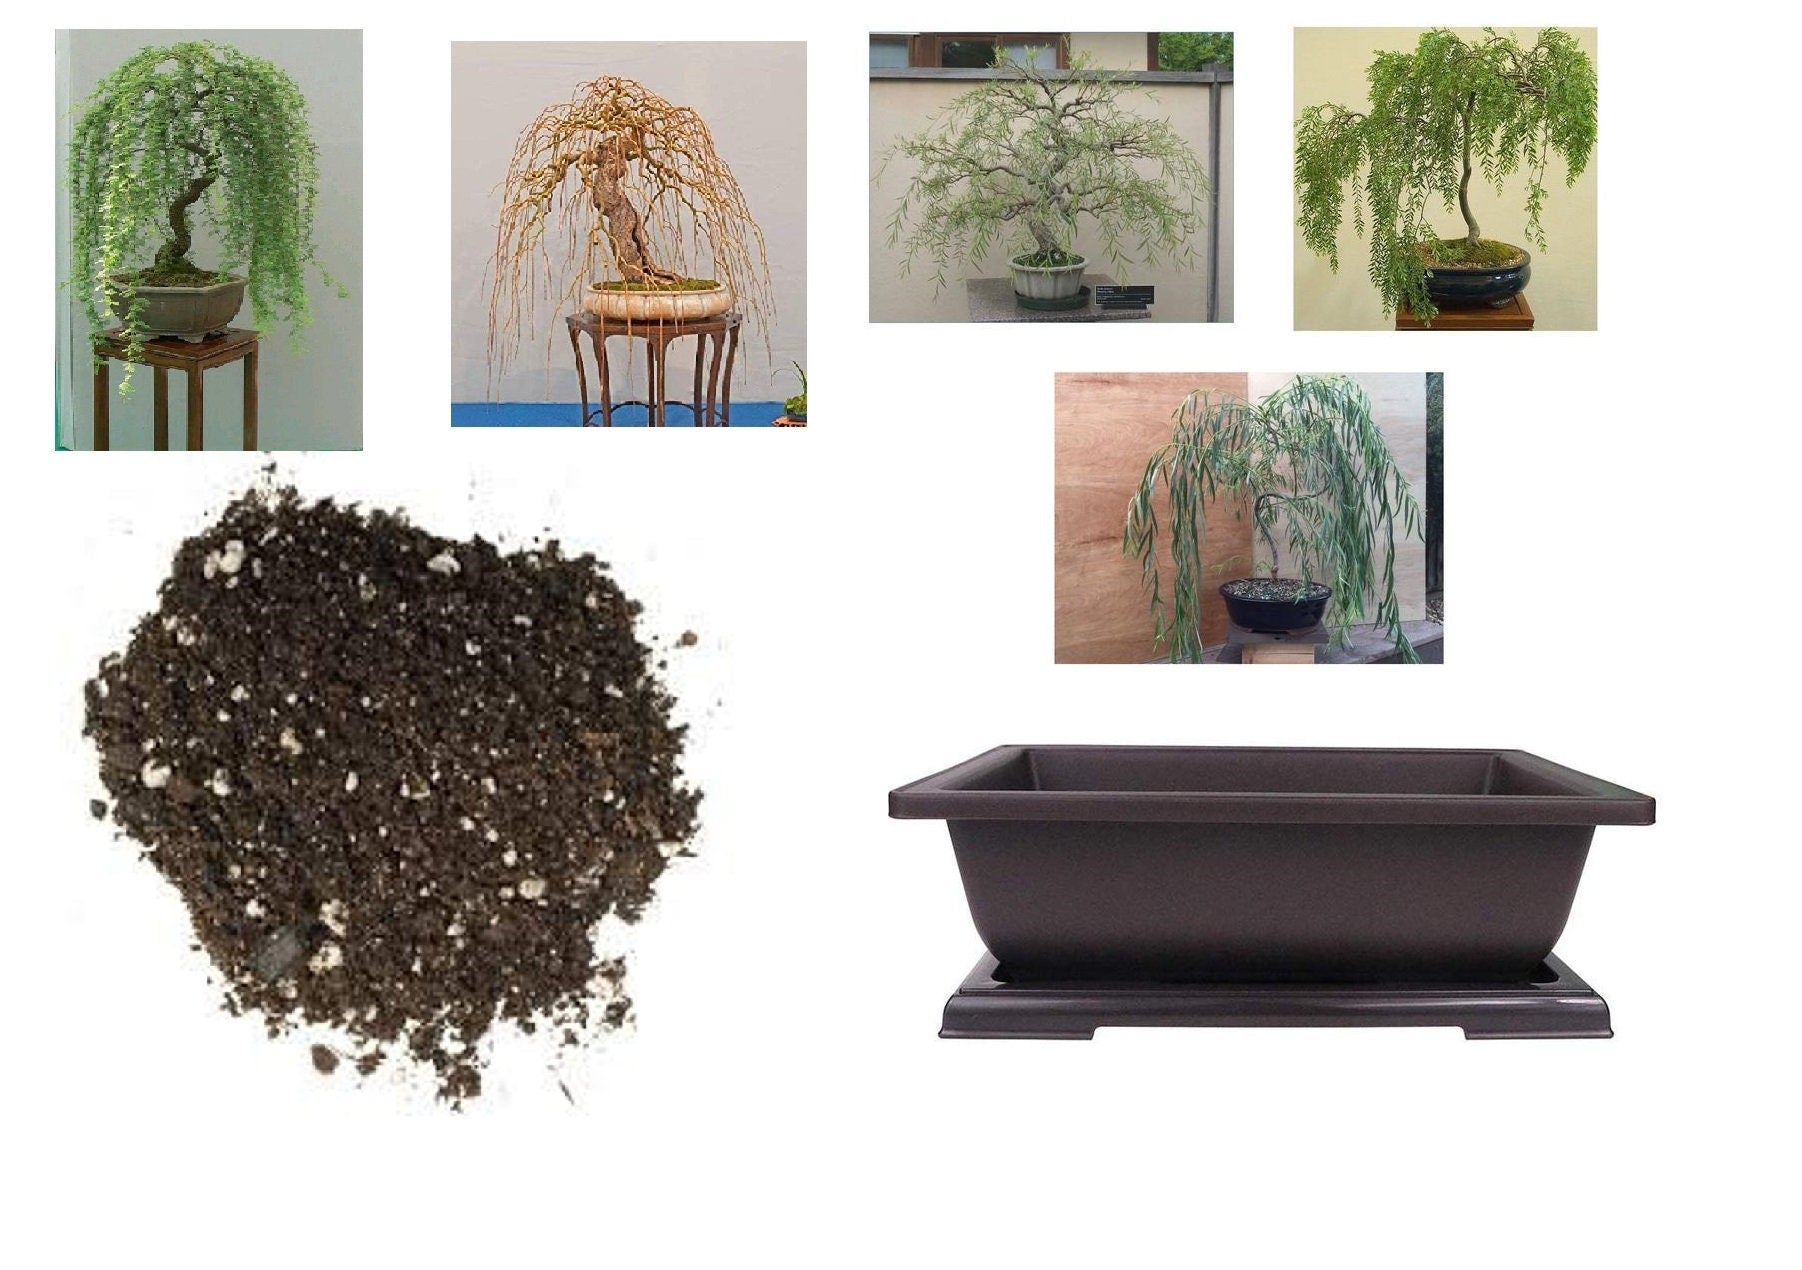 Bonsai Tree Kit – Grow 4 Types of Bonsai Tree from Seed – Highly Desired  Species – CZ-Grain